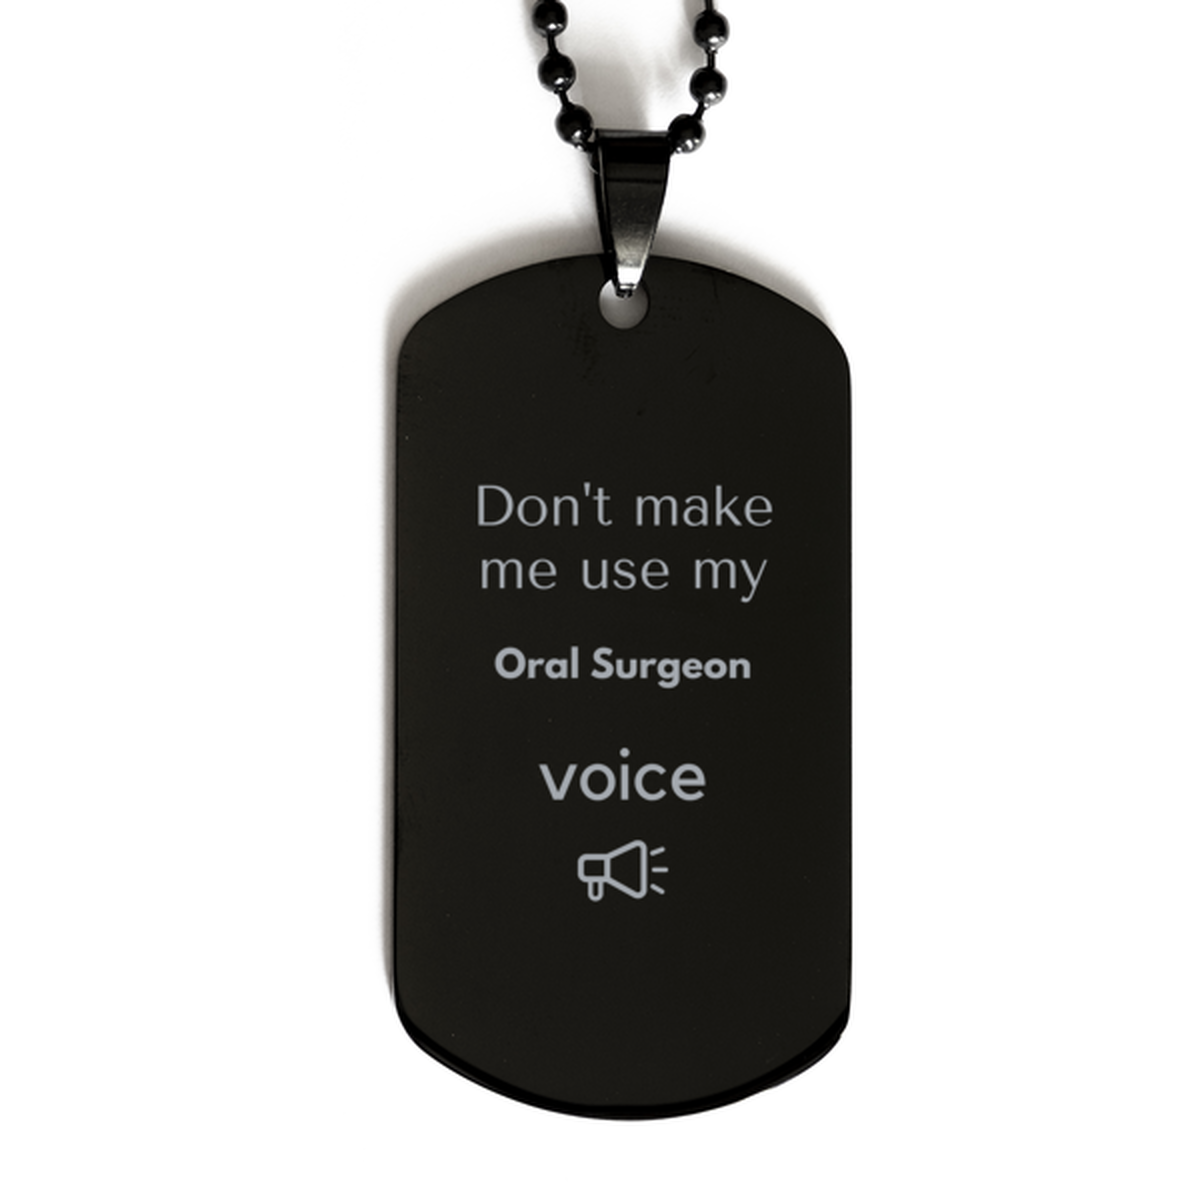 Don't make me use my Oral Surgeon voice, Sarcasm Oral Surgeon Gifts, Christmas Oral Surgeon Black Dog Tag Birthday Unique Gifts For Oral Surgeon Coworkers, Men, Women, Colleague, Friends